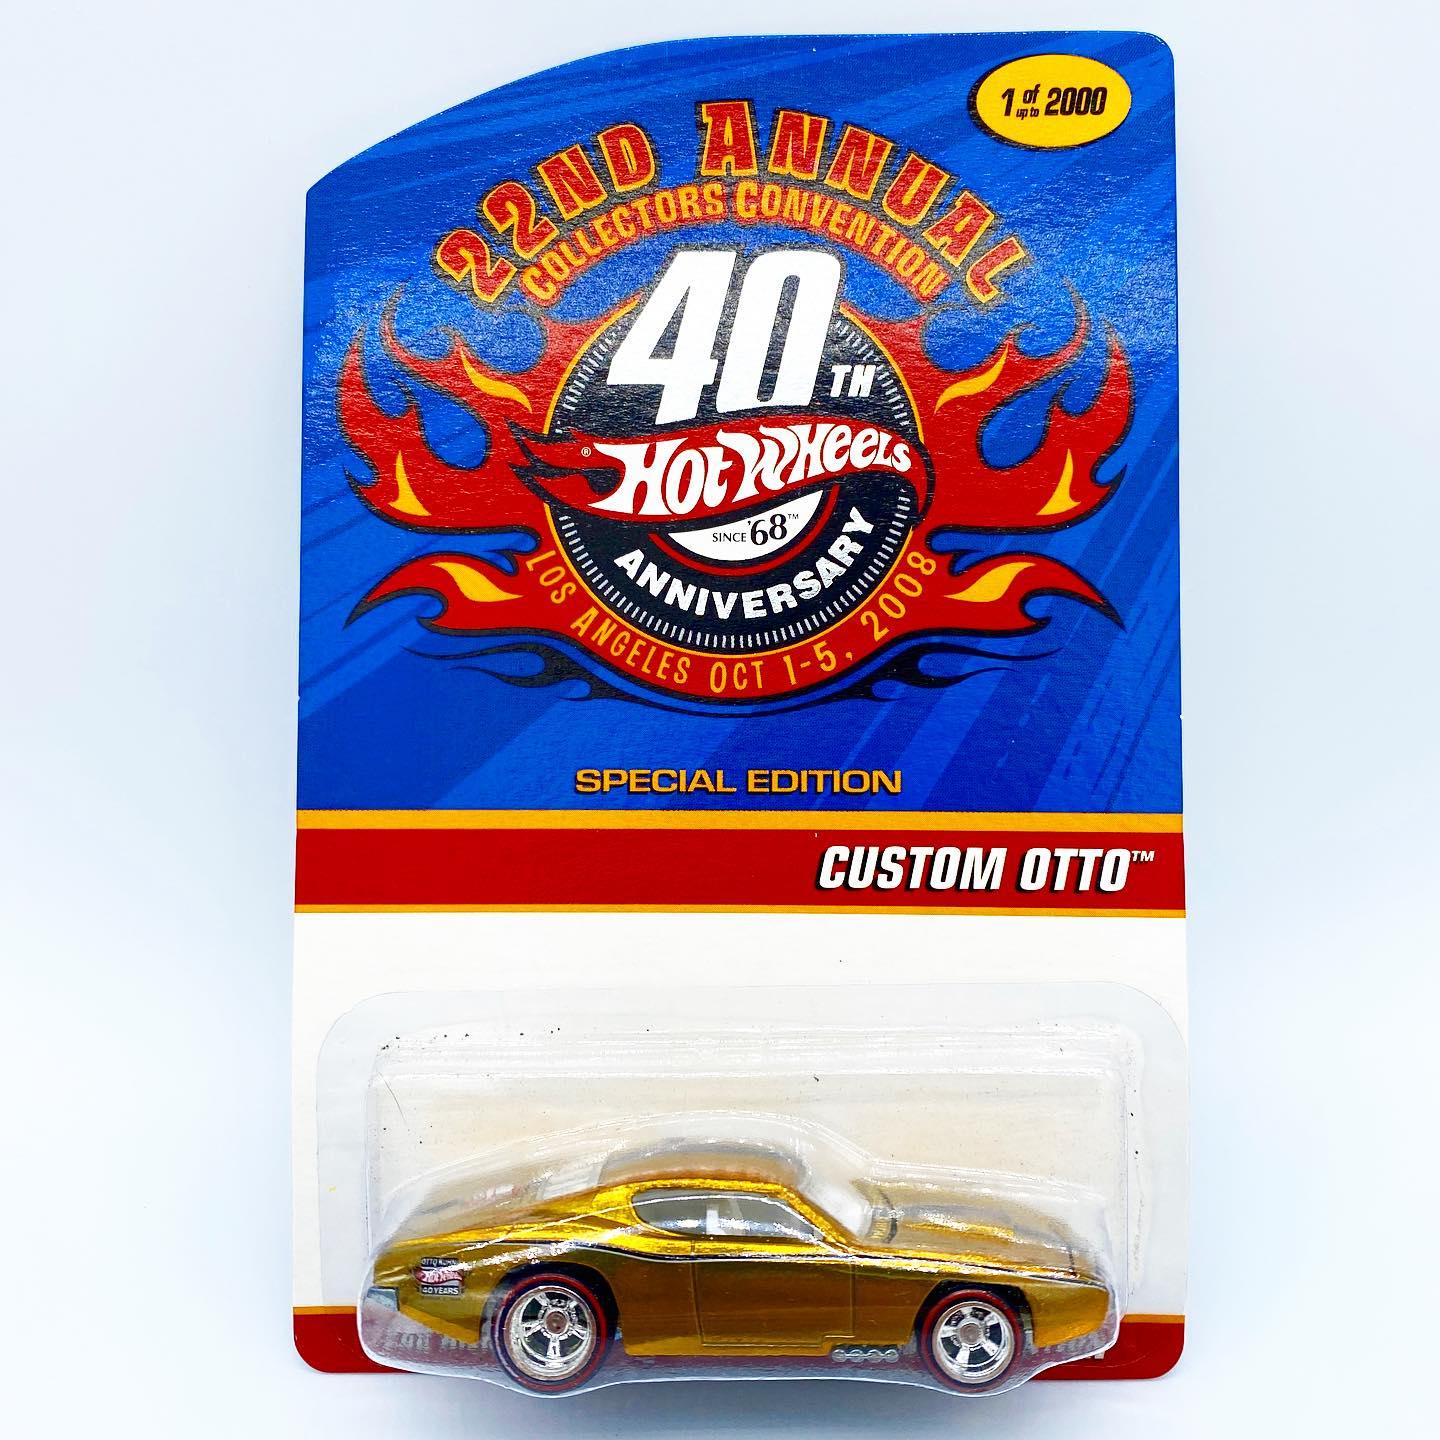 22nd Annual Hot Wheels Collectors Convention | Hot Wheels Wiki 